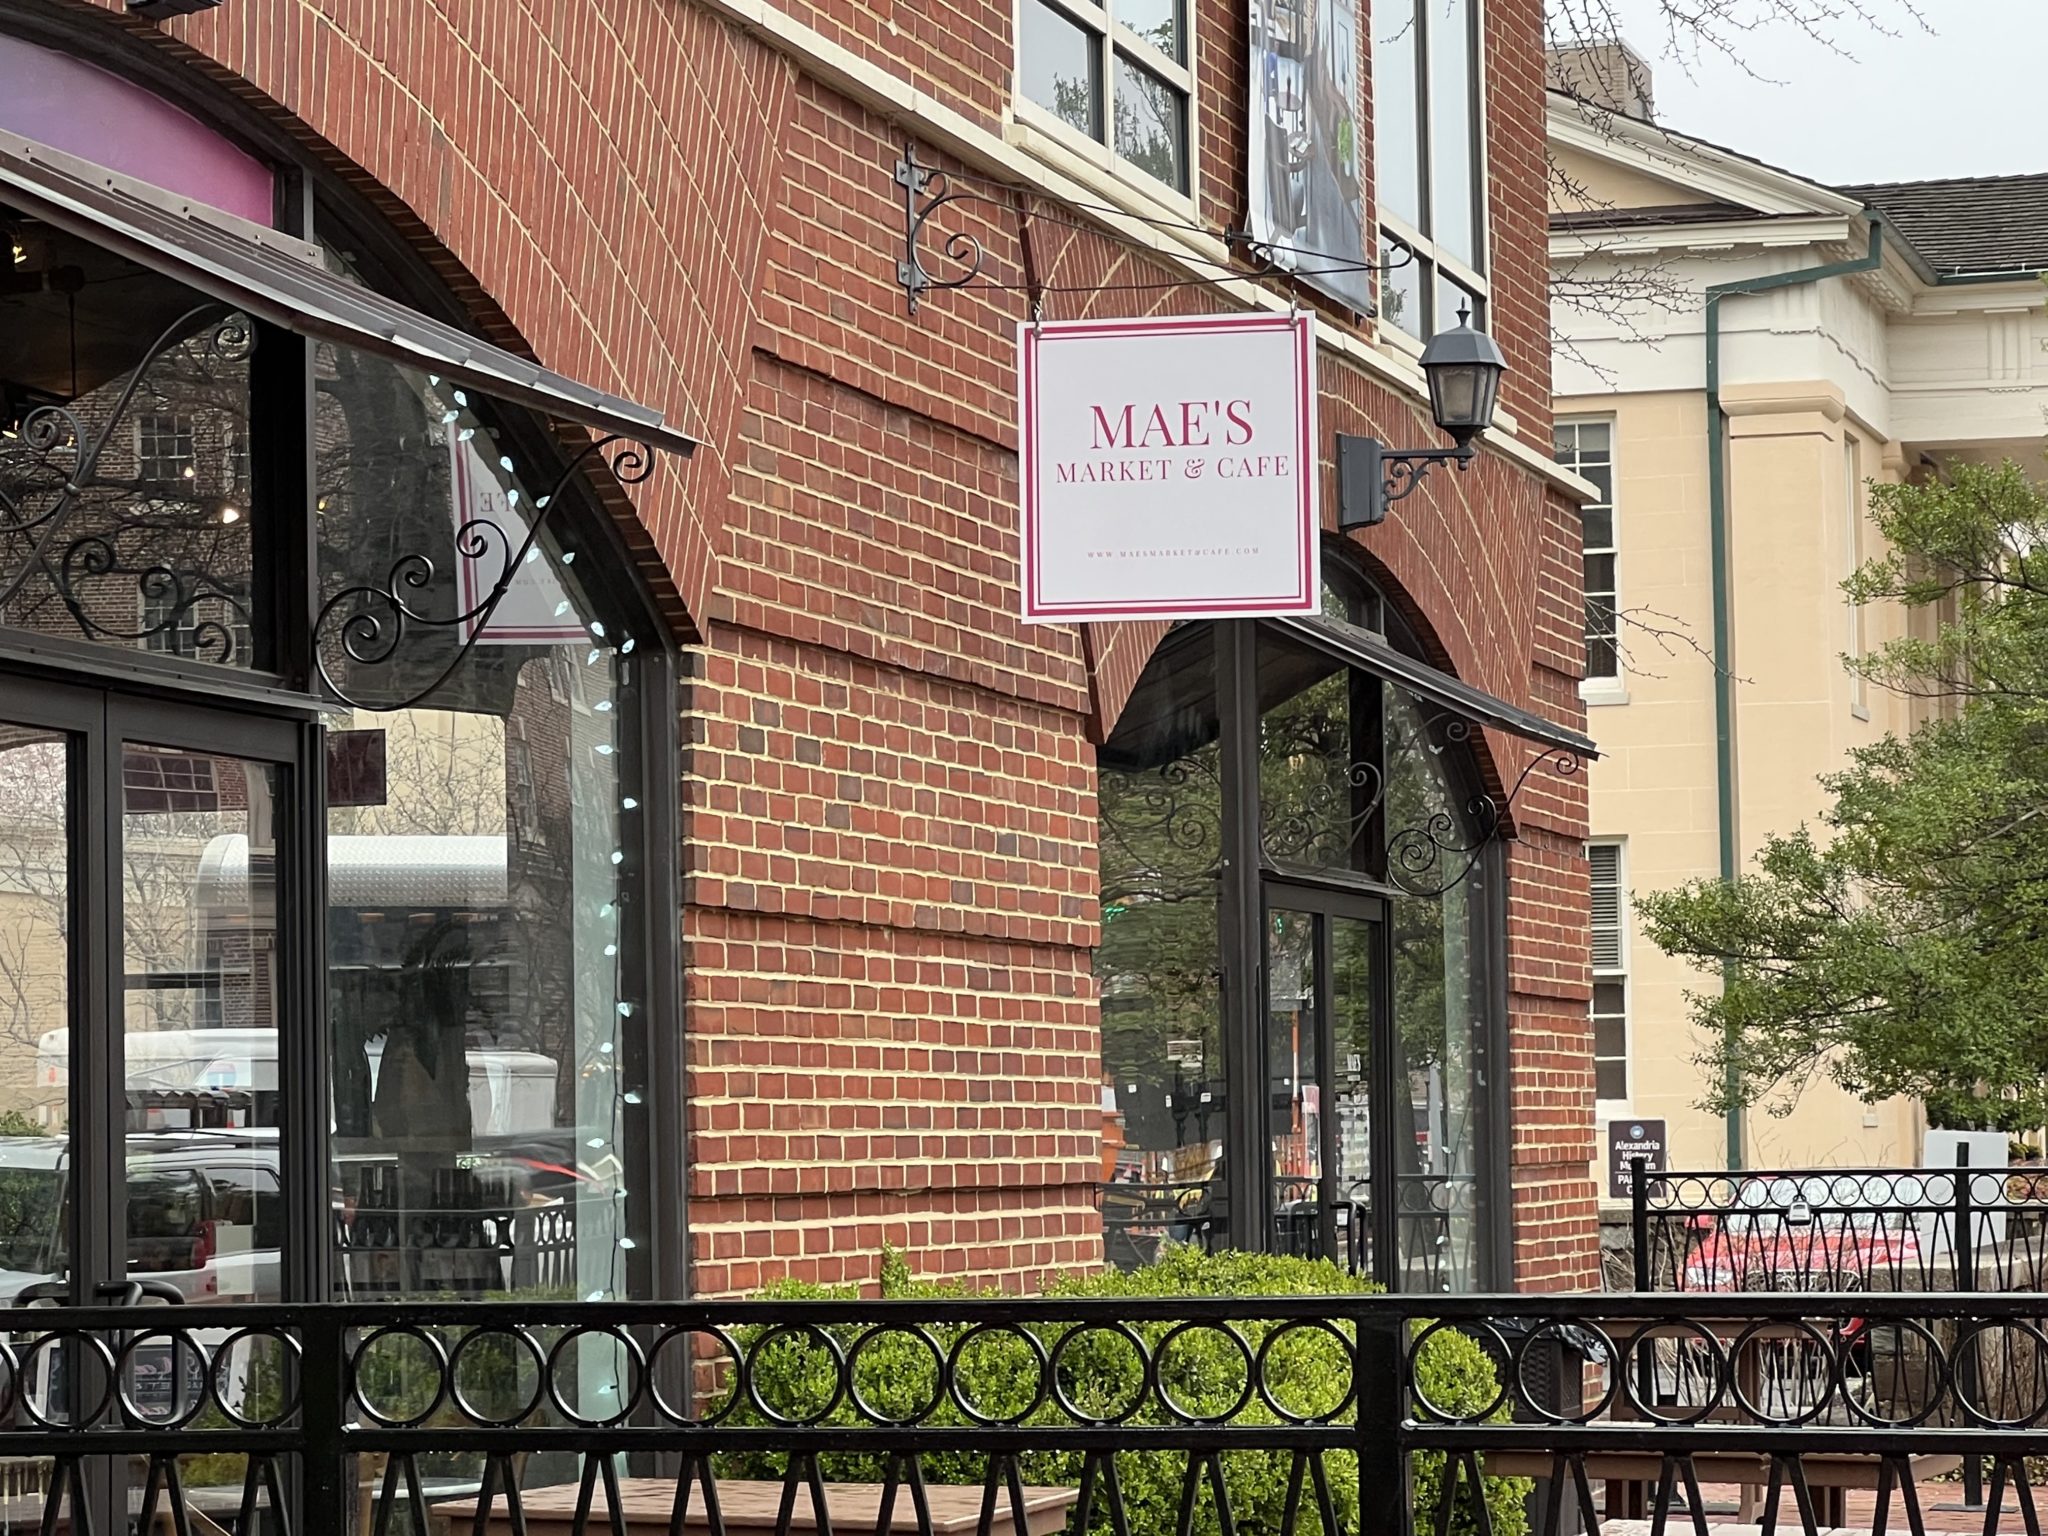 Mae's Market and Café in Old Town Alexandria